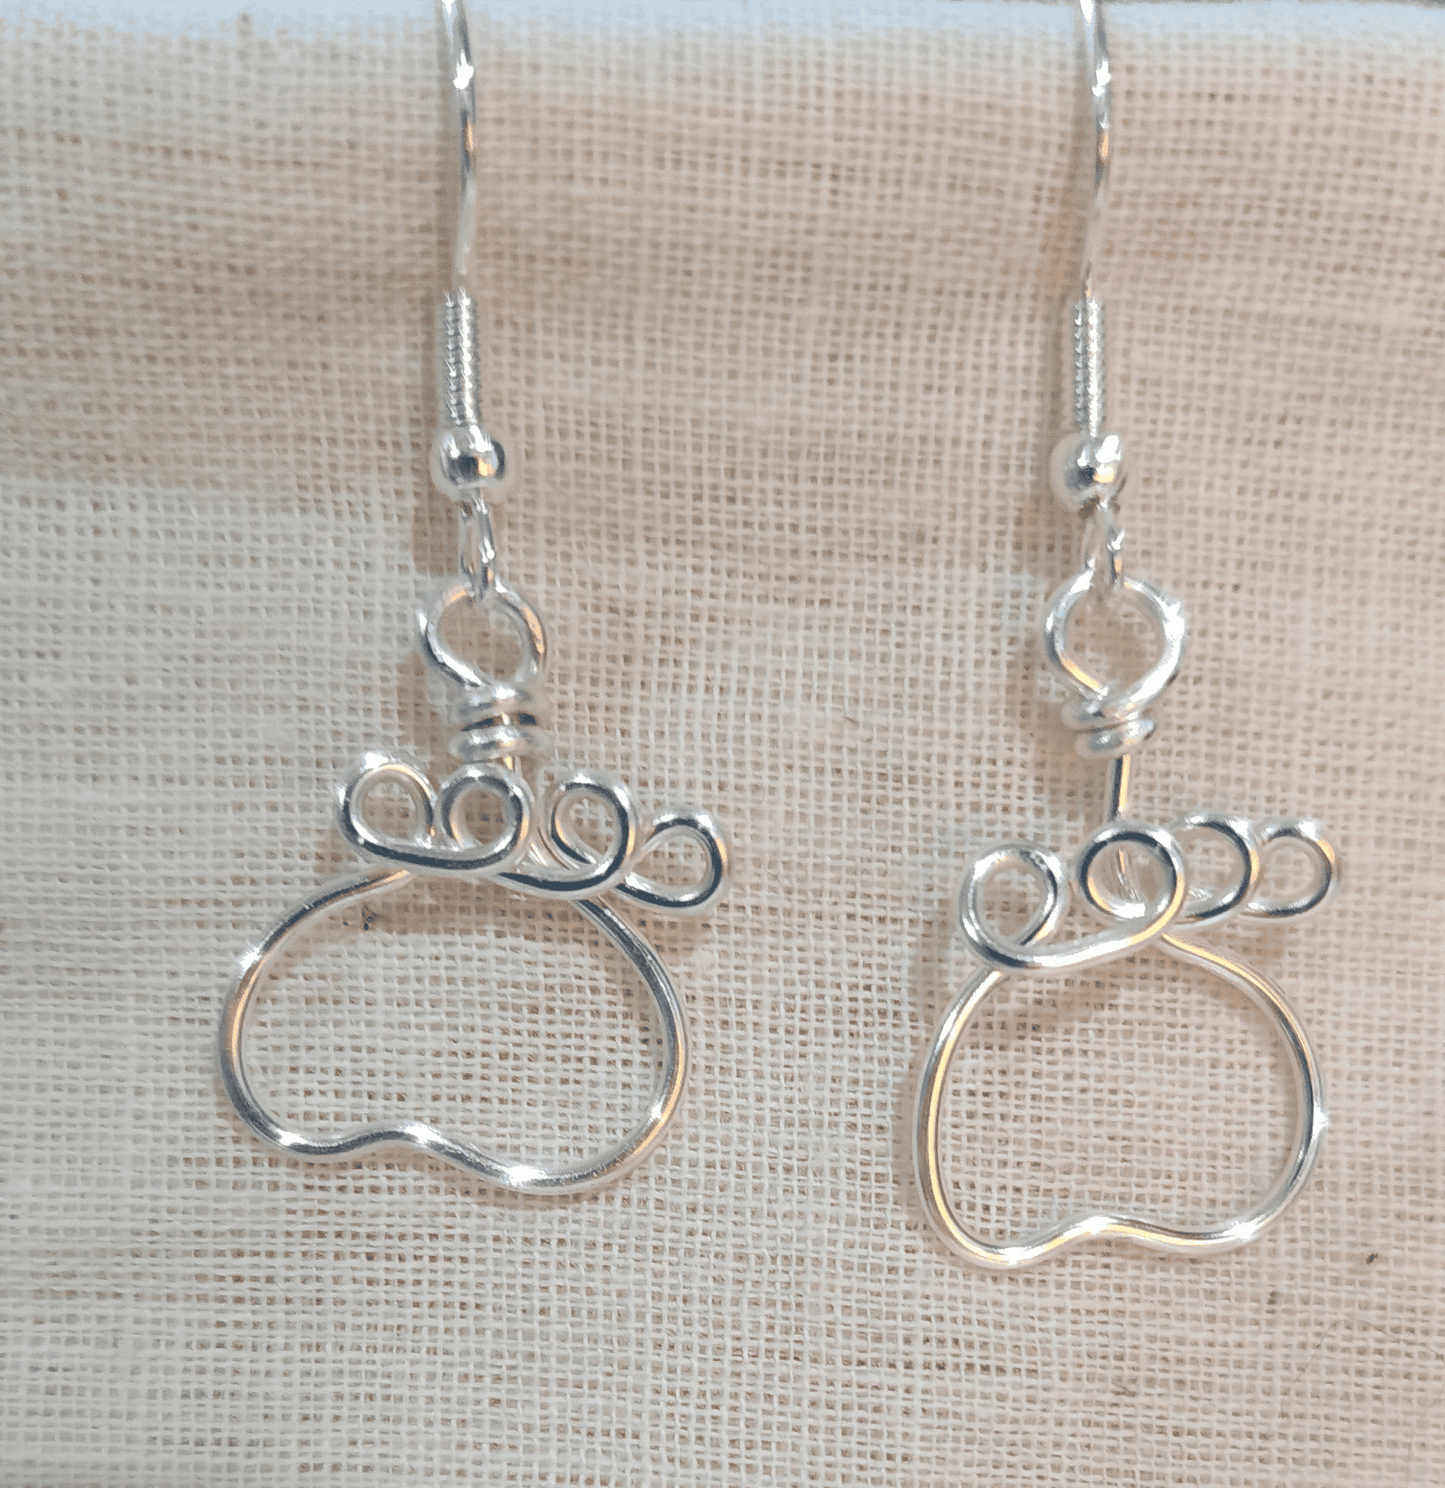 Minimalist Gold Or Silver Paw Print Hypoallergenic Earrings